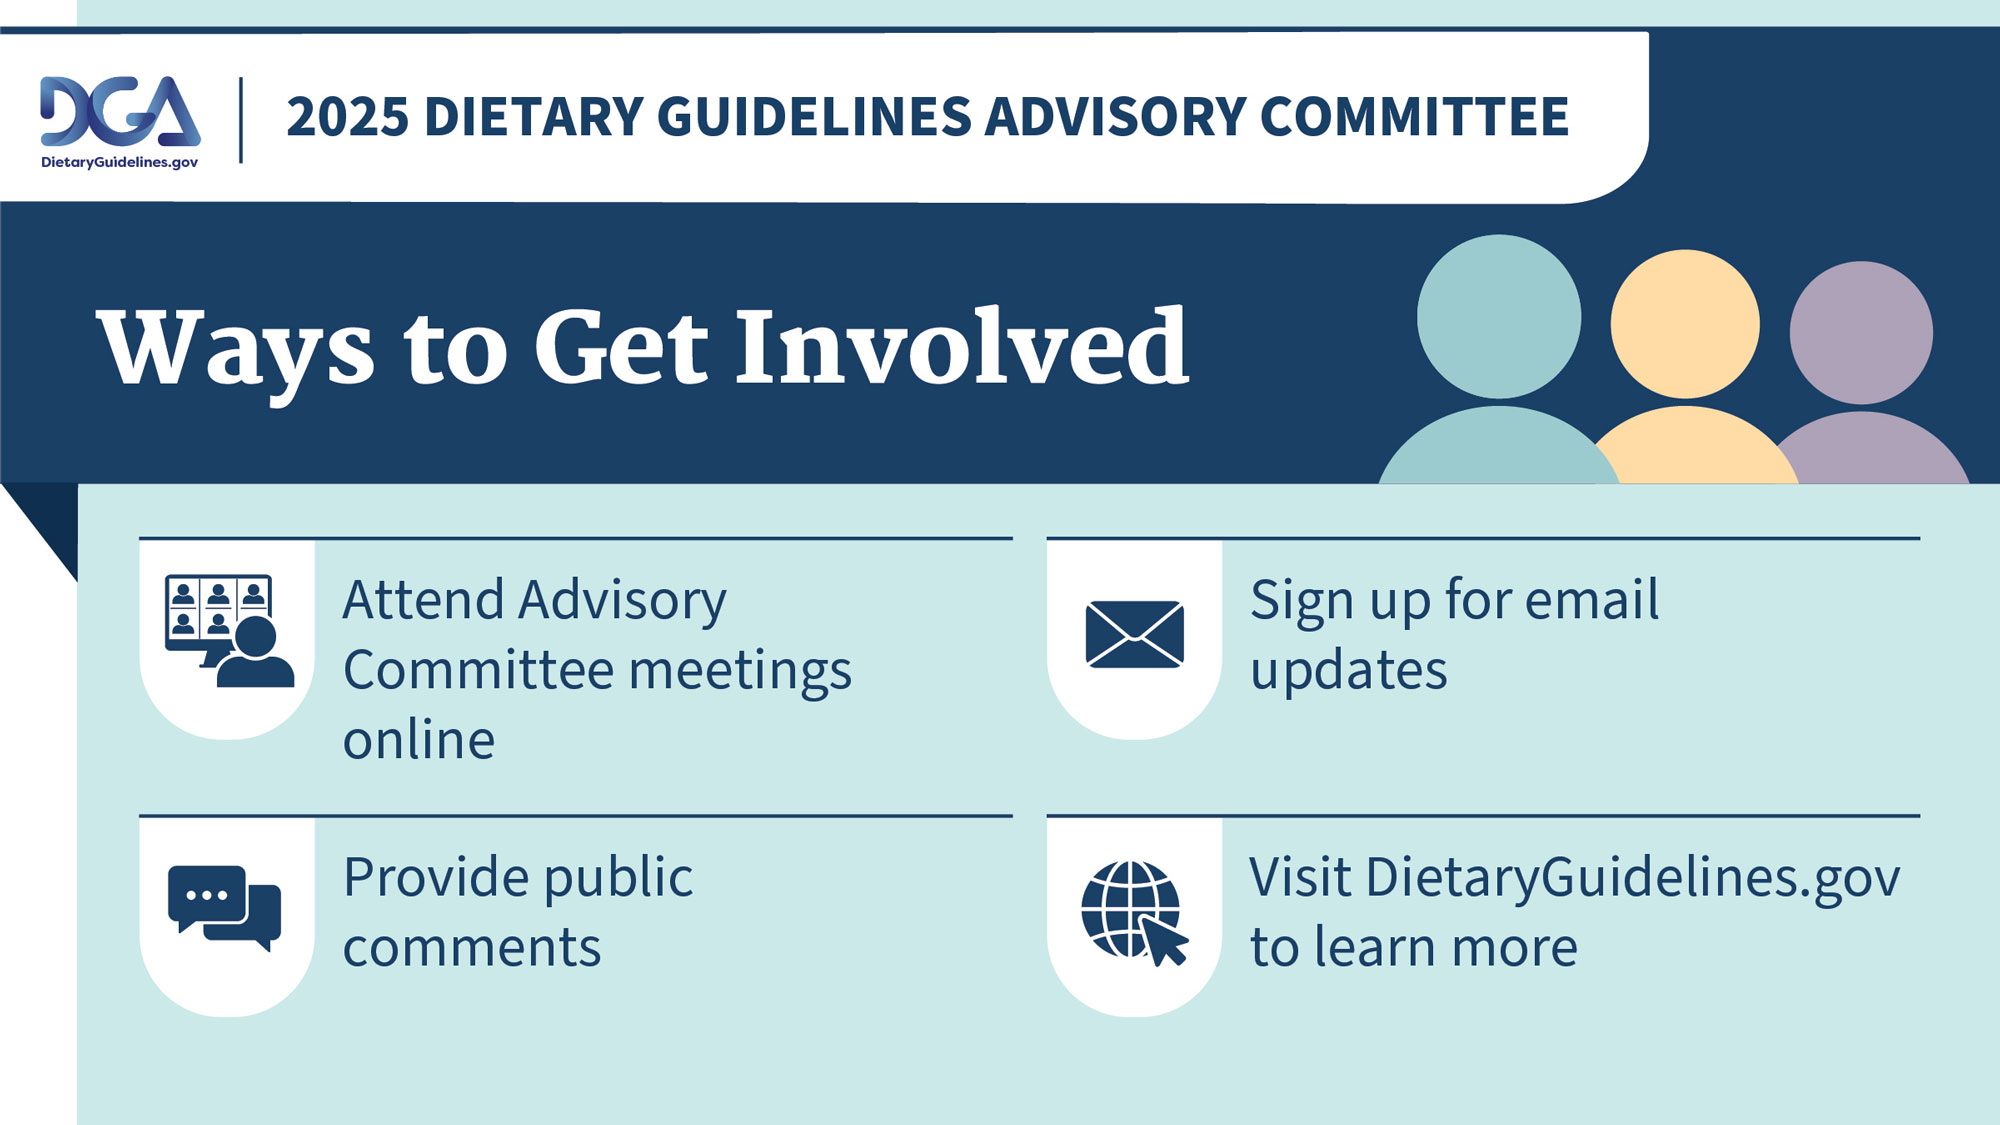 Graphic listing ways to get involved with the 2025 Dietary Guidelines Advisory Committee. 1. Attend advisory committee meeting online. 2. Sign up for email updates. 3. Provide public comments. 4. Visit DietaryGuidelines.gov to learn more.